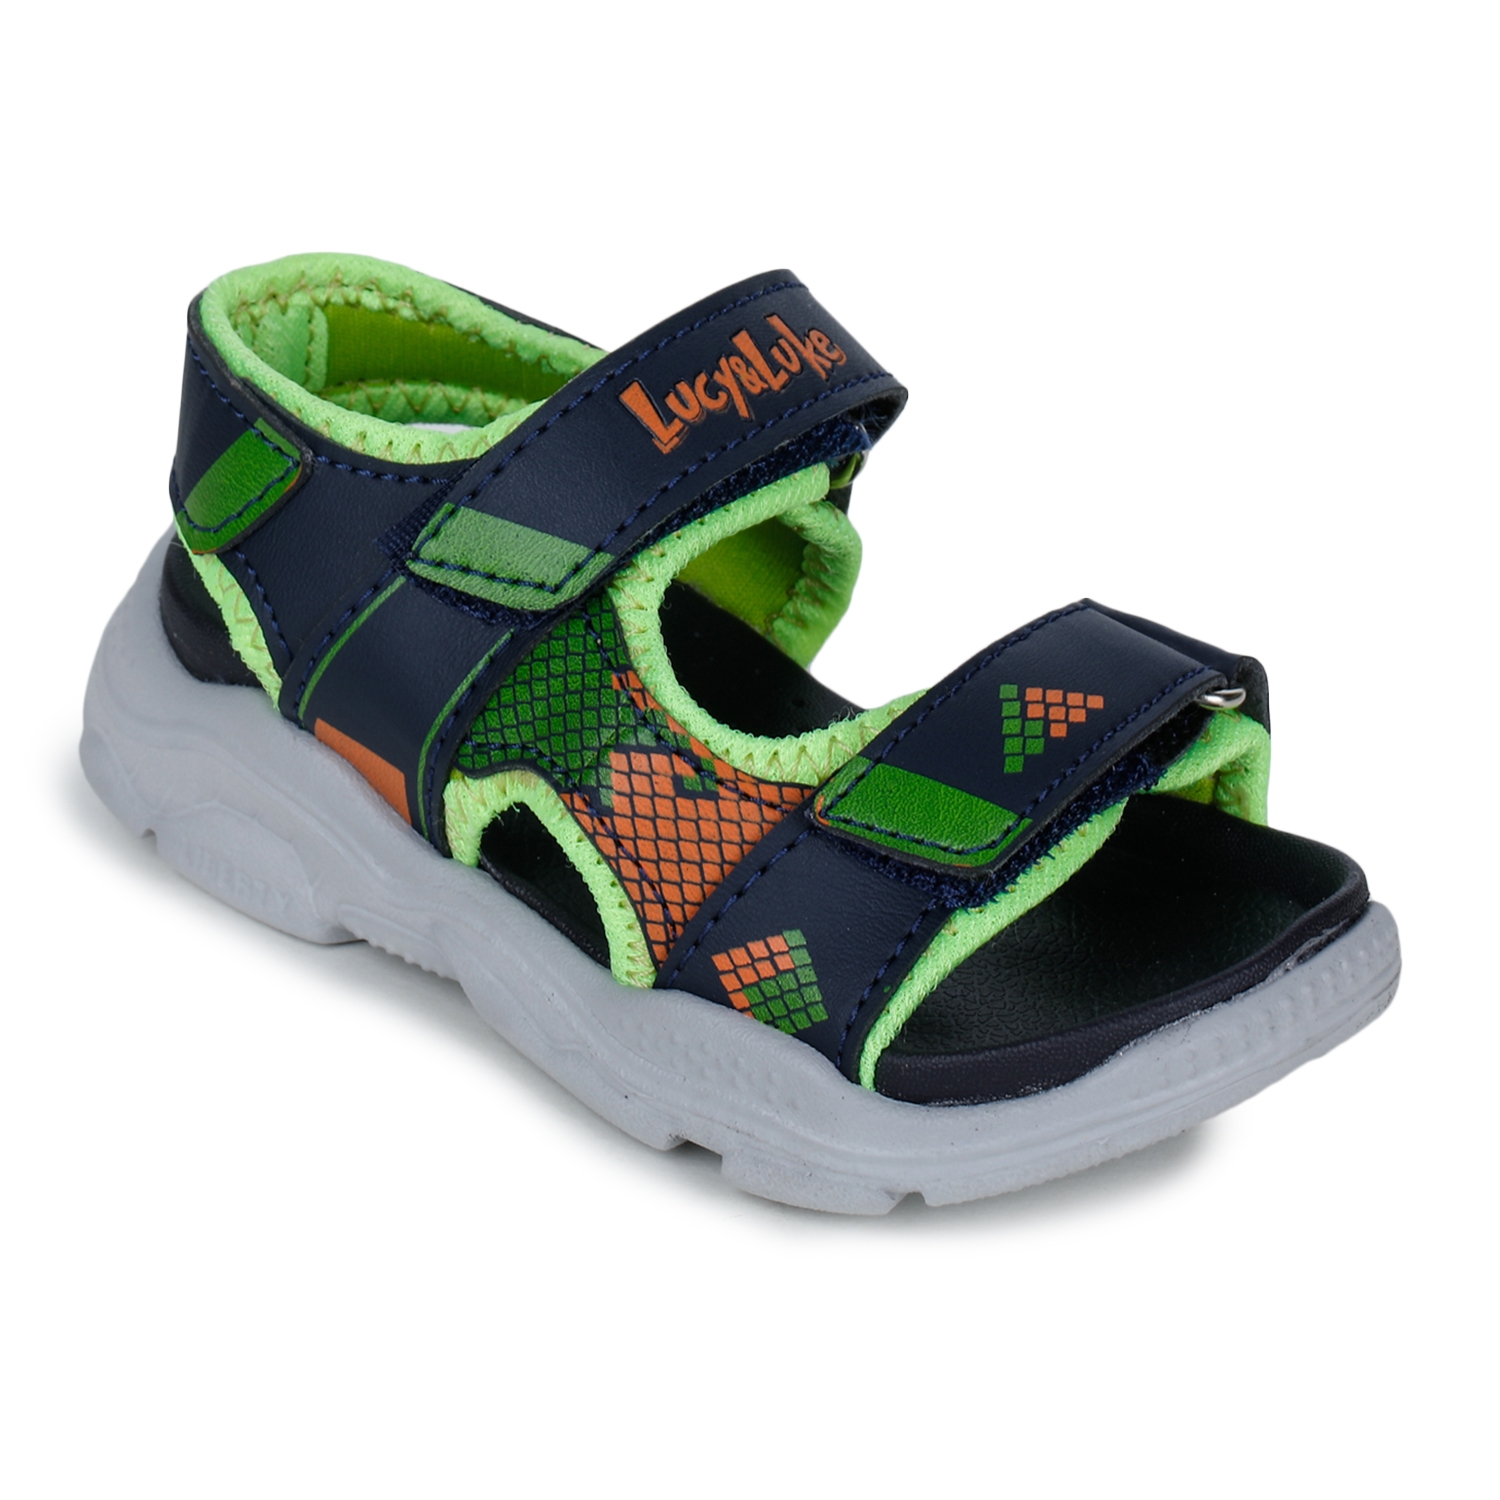 Lucy & Luke by Liberty RICKY-6 Green Sandals for Kids